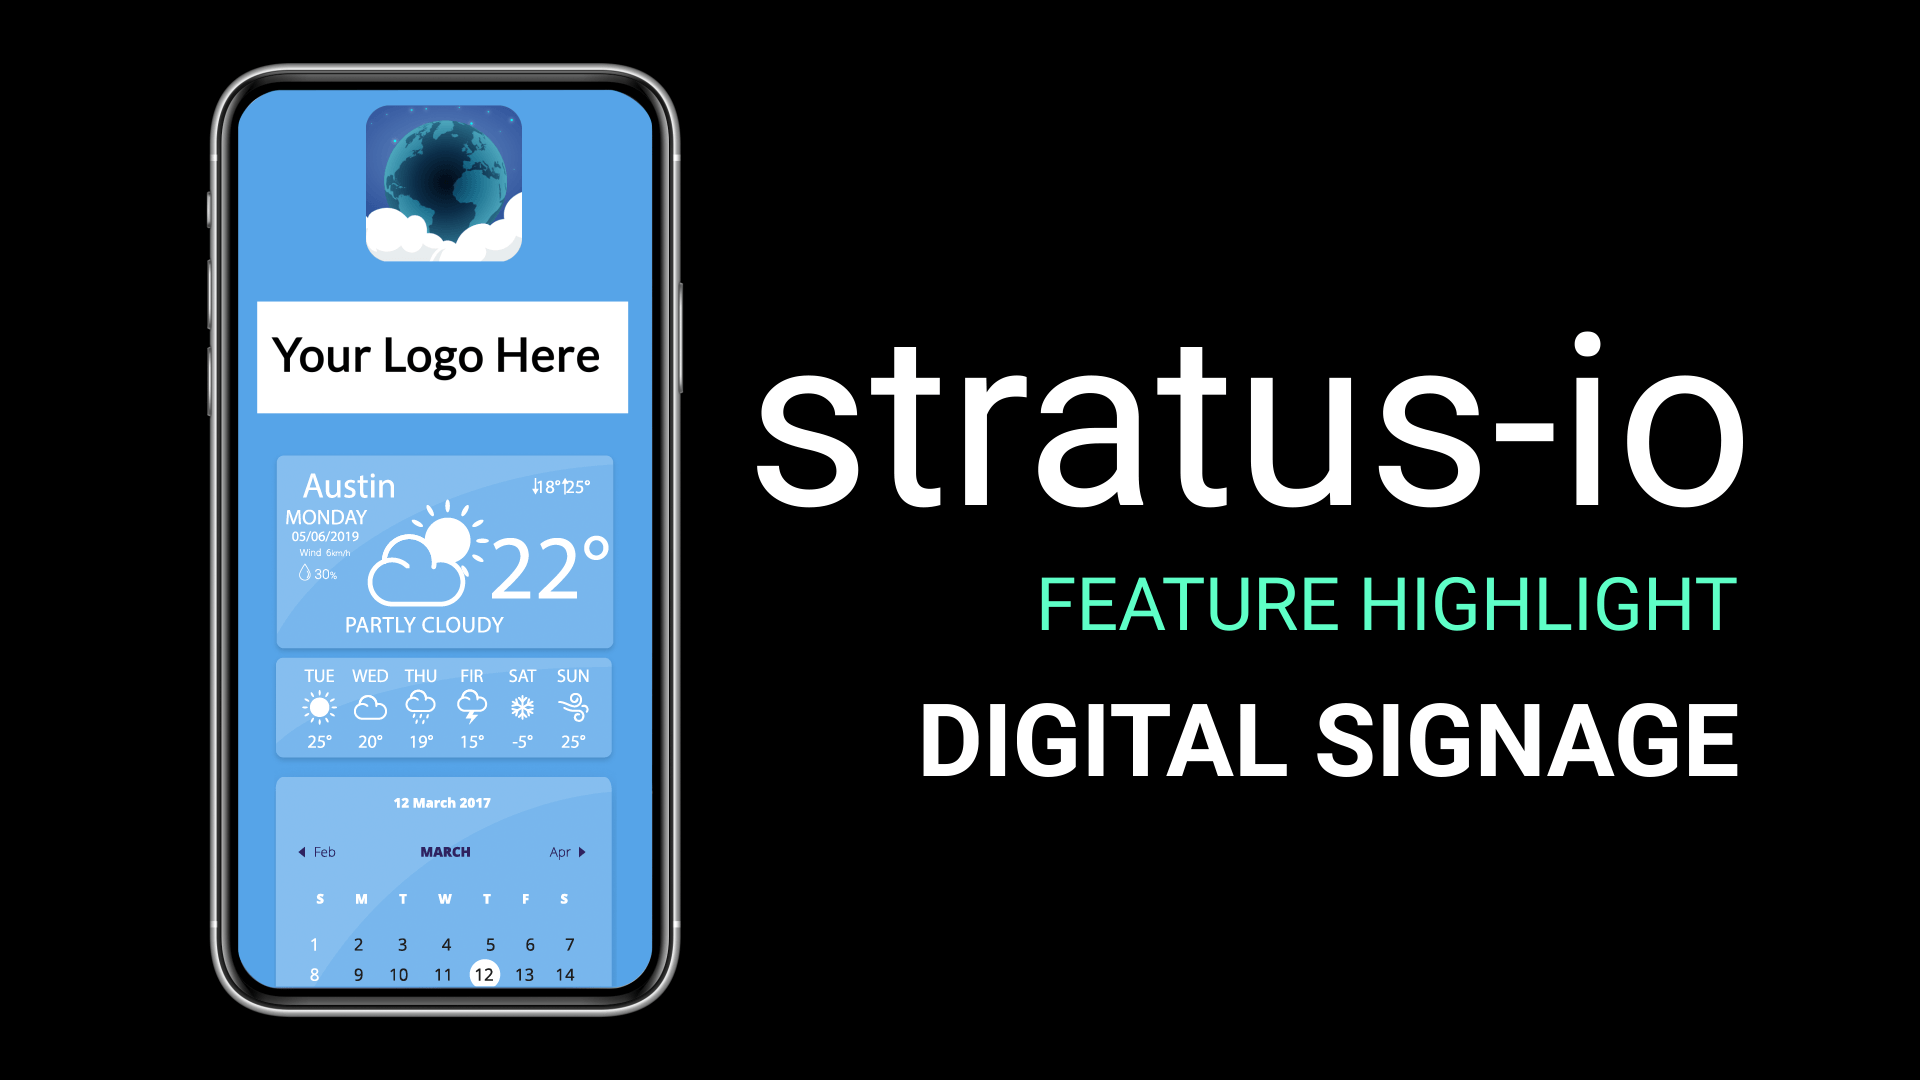 Cloud-in-Hand - stratus-io Digital Signage custom background for mobile attendance mustering safety-training